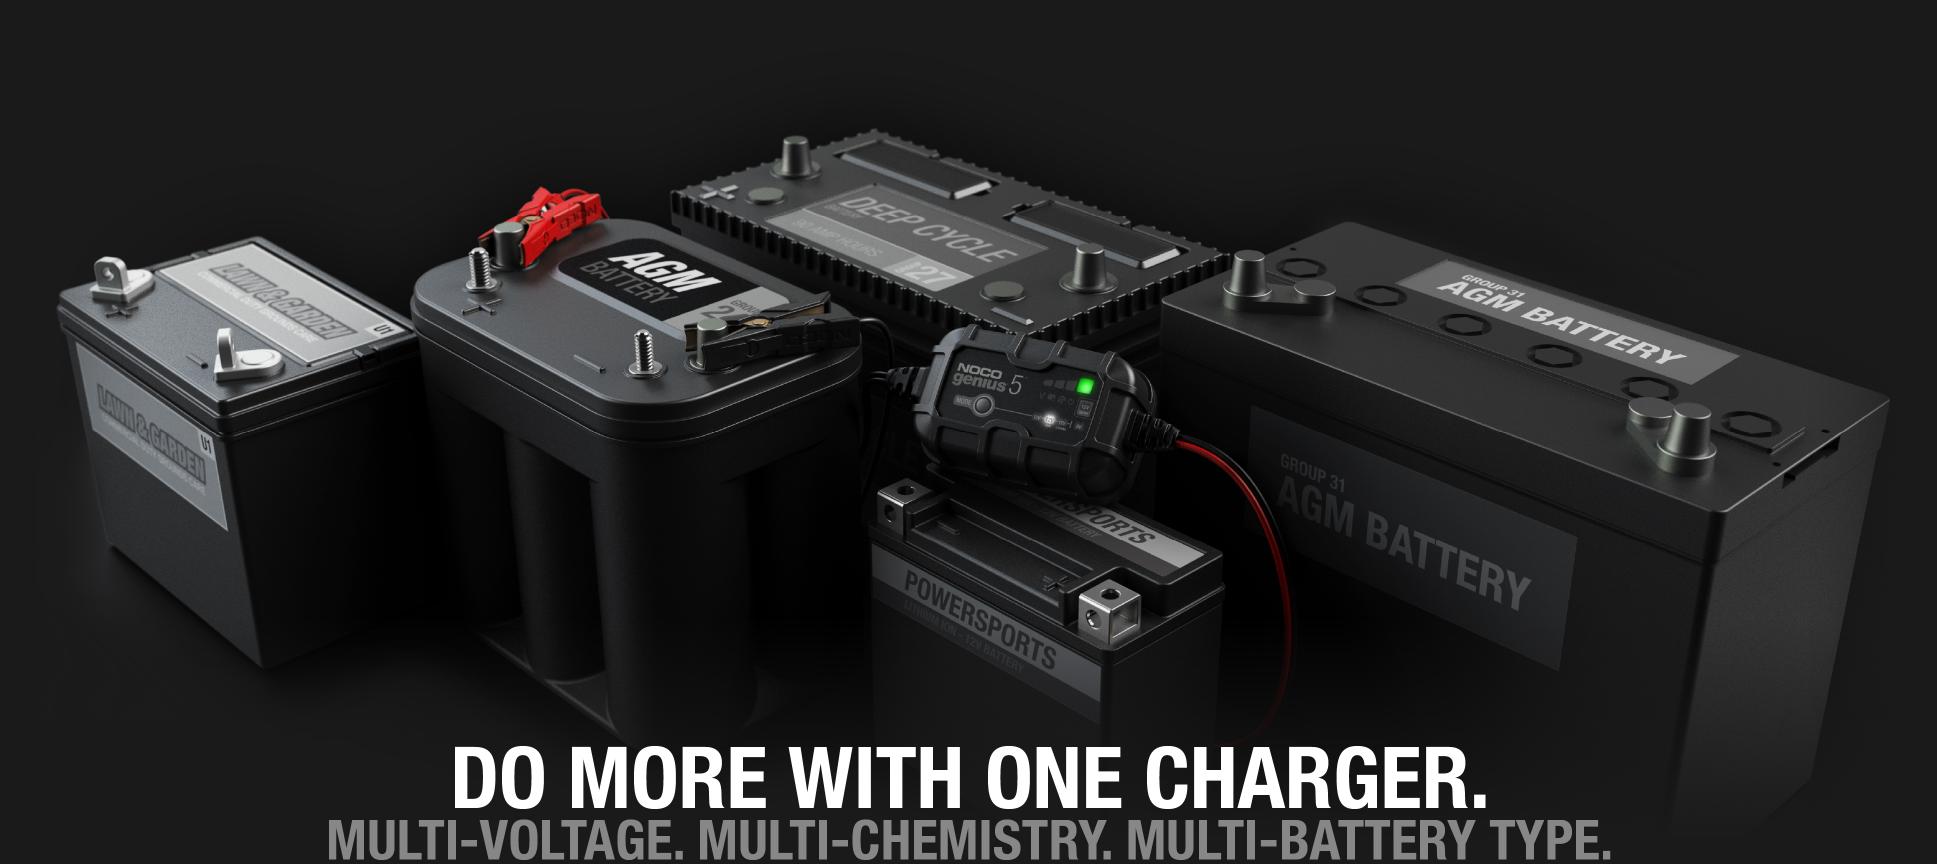 NOCO Genius Multi-Purpose Battery Chargers - JOES Racing Products